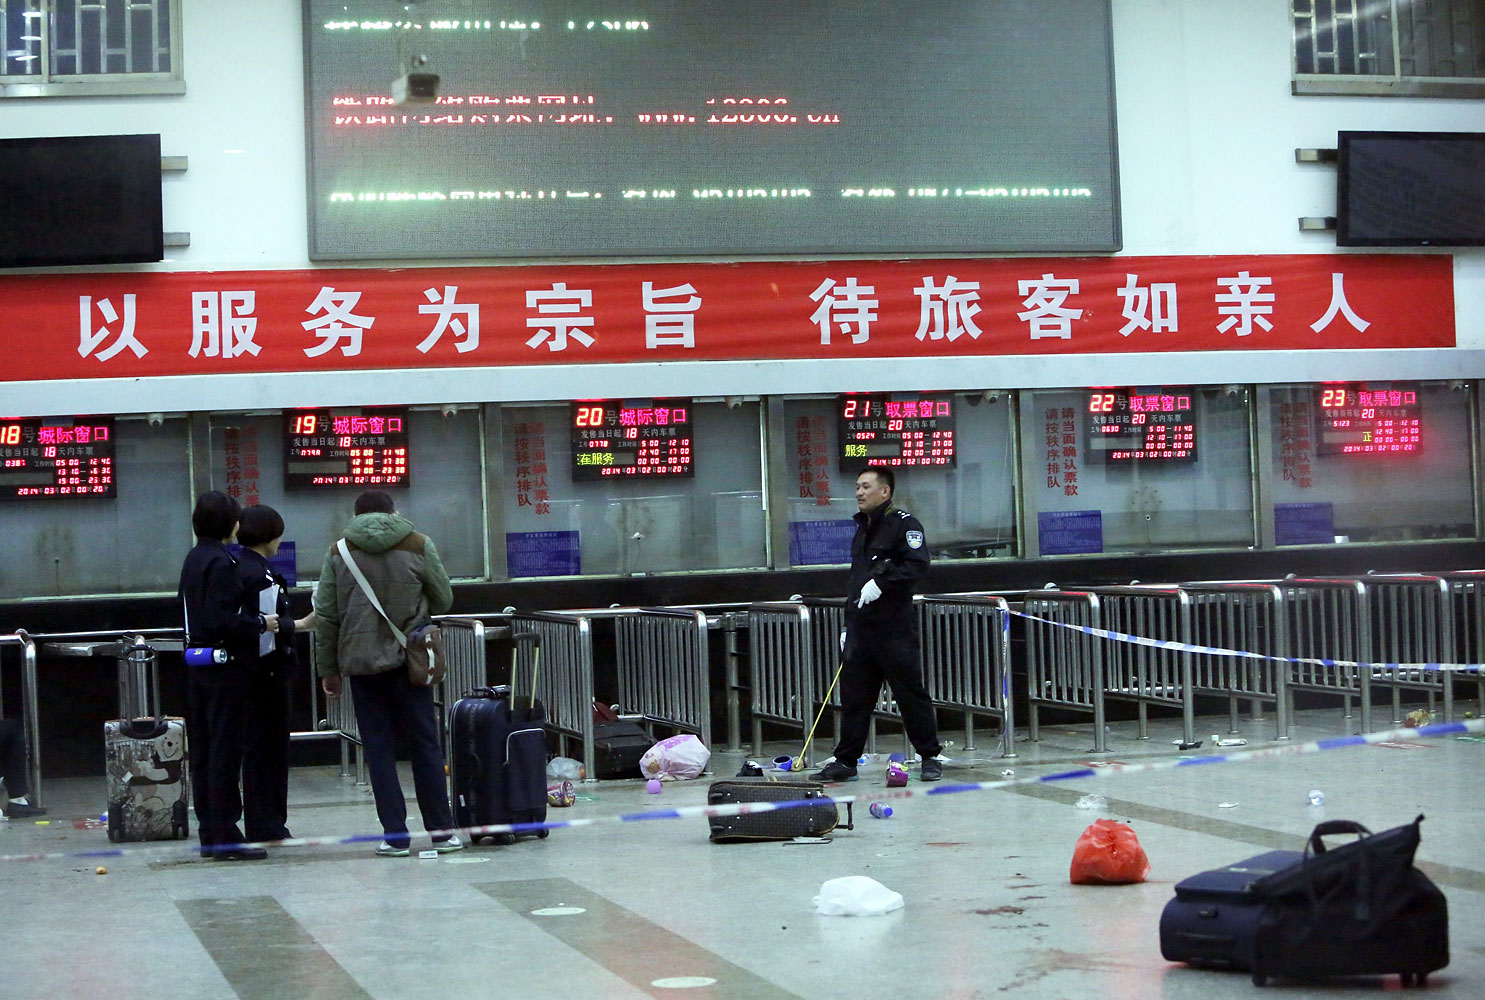 Chinese police investigators inspect the scene of an attack at the railway station in Kunming, southwest China's Yunnan province, on March 2, 2014 (AFP/Getty Images)